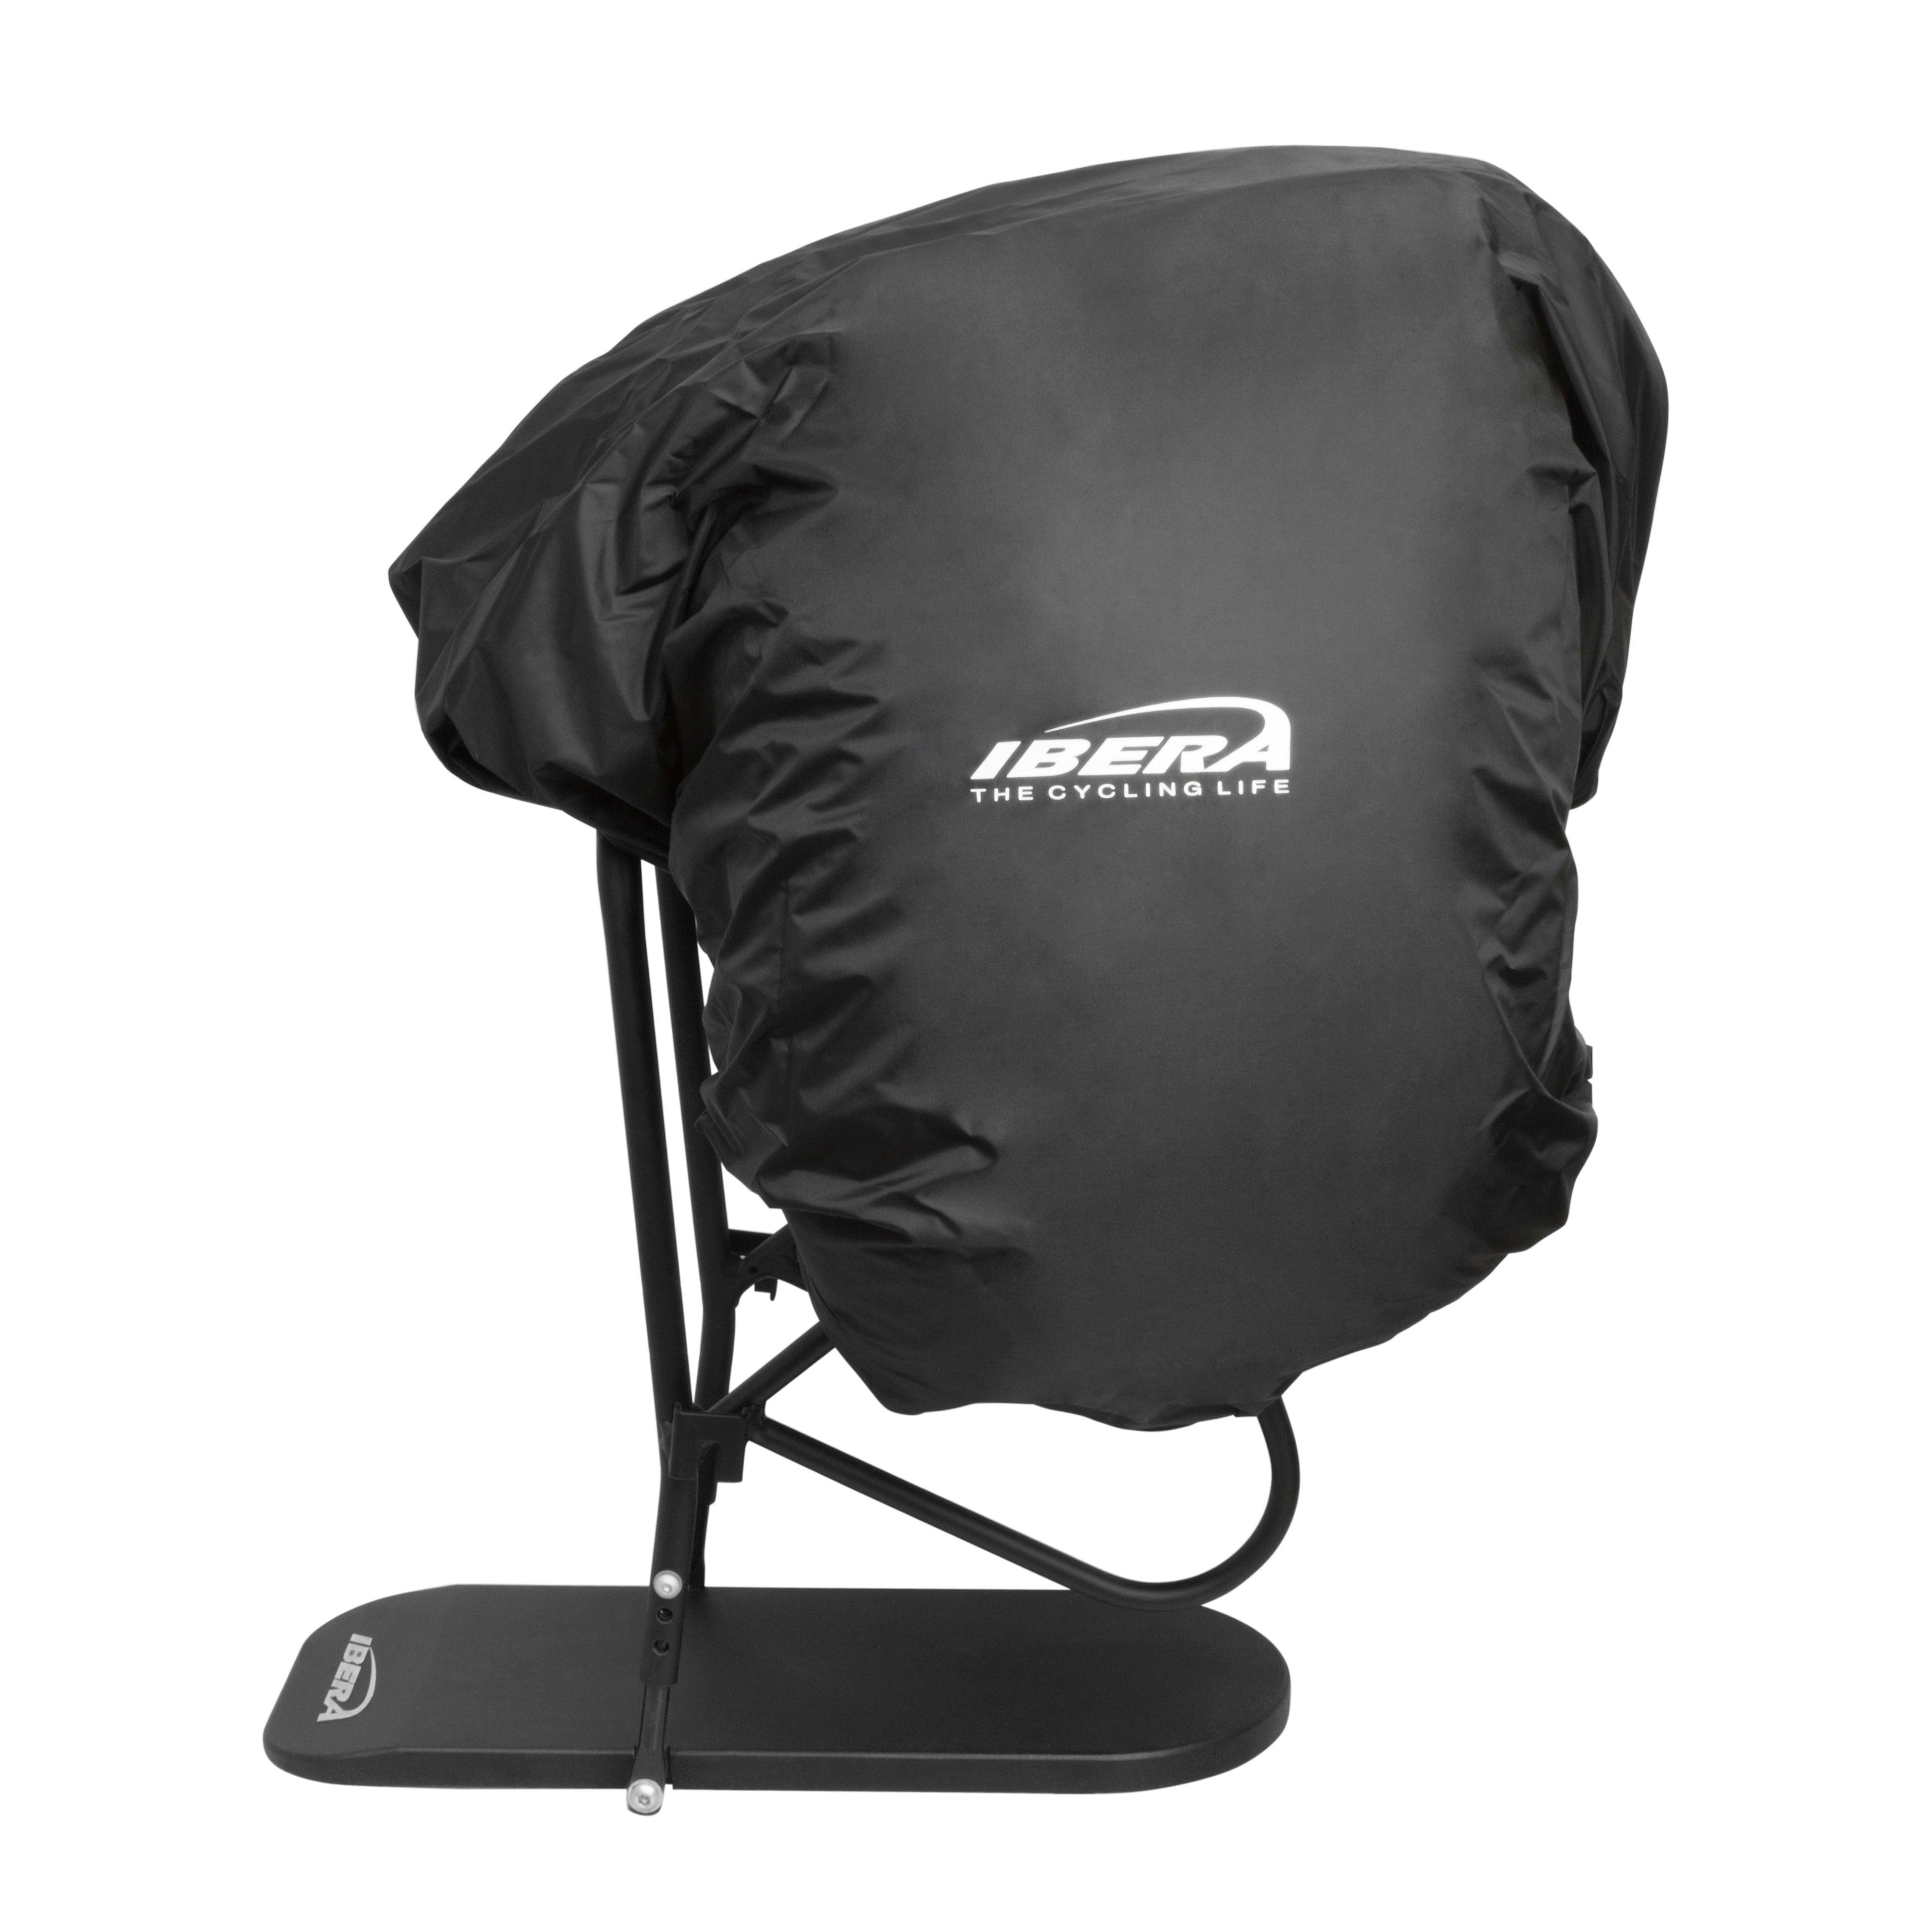 Rain Cover on Bag - Side View